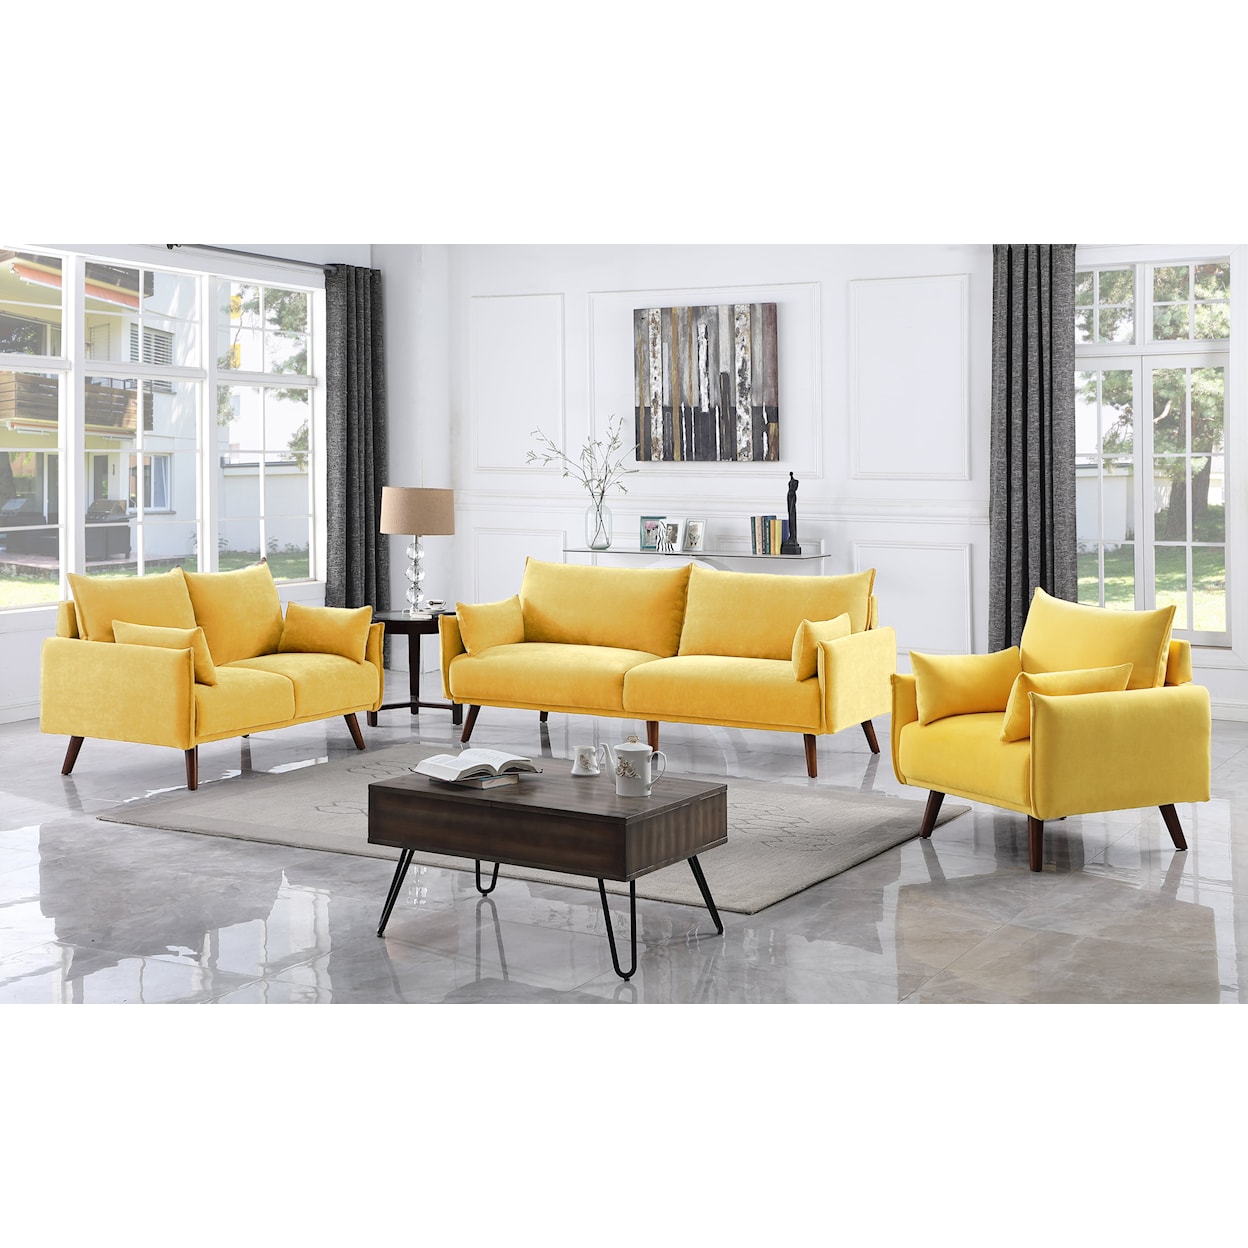 New Classic Reeves Living Room Set